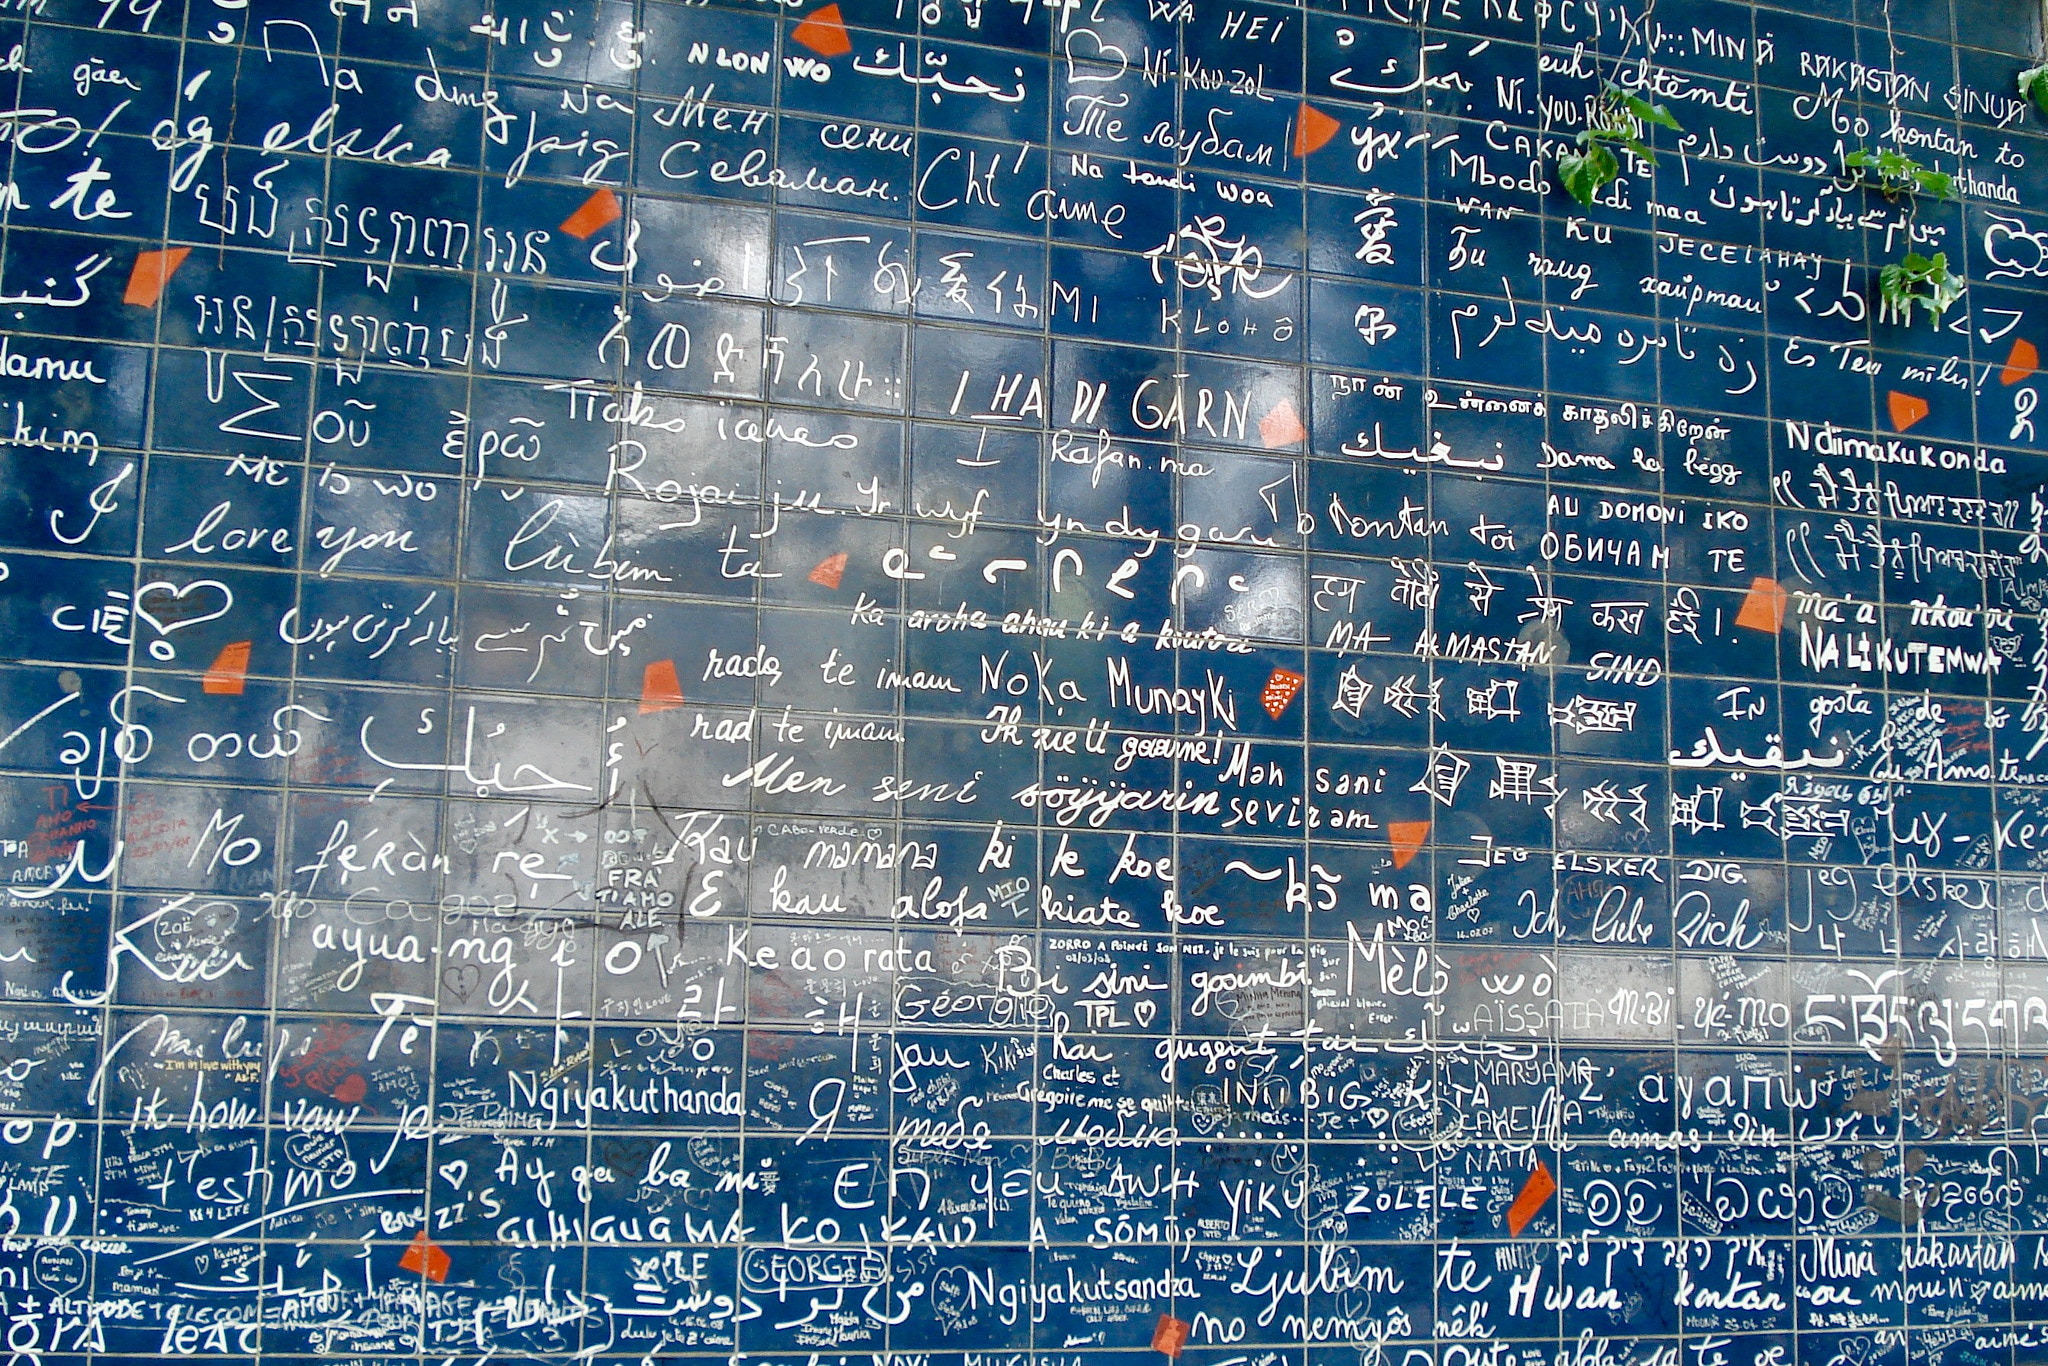 Sony DSC-W30 sample photo. Wall of love @paris, france photography